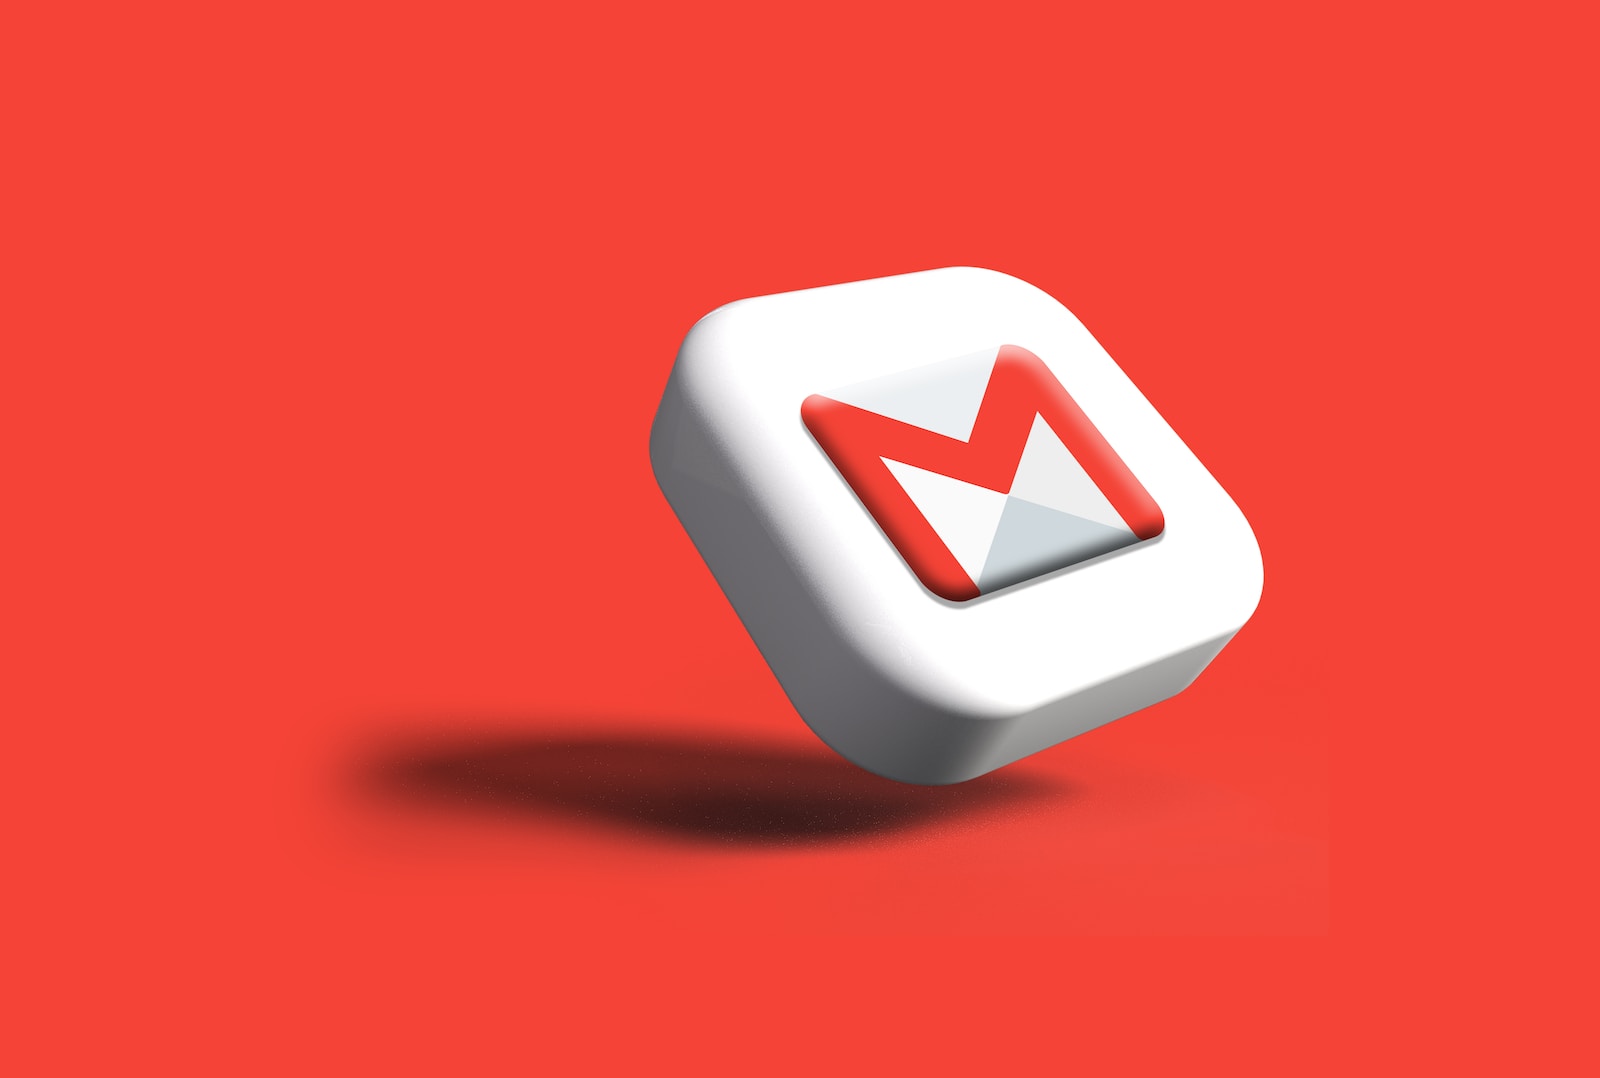 Choosing the Best Email Provider for Your Business: A Comparison of Gmail and Zoho